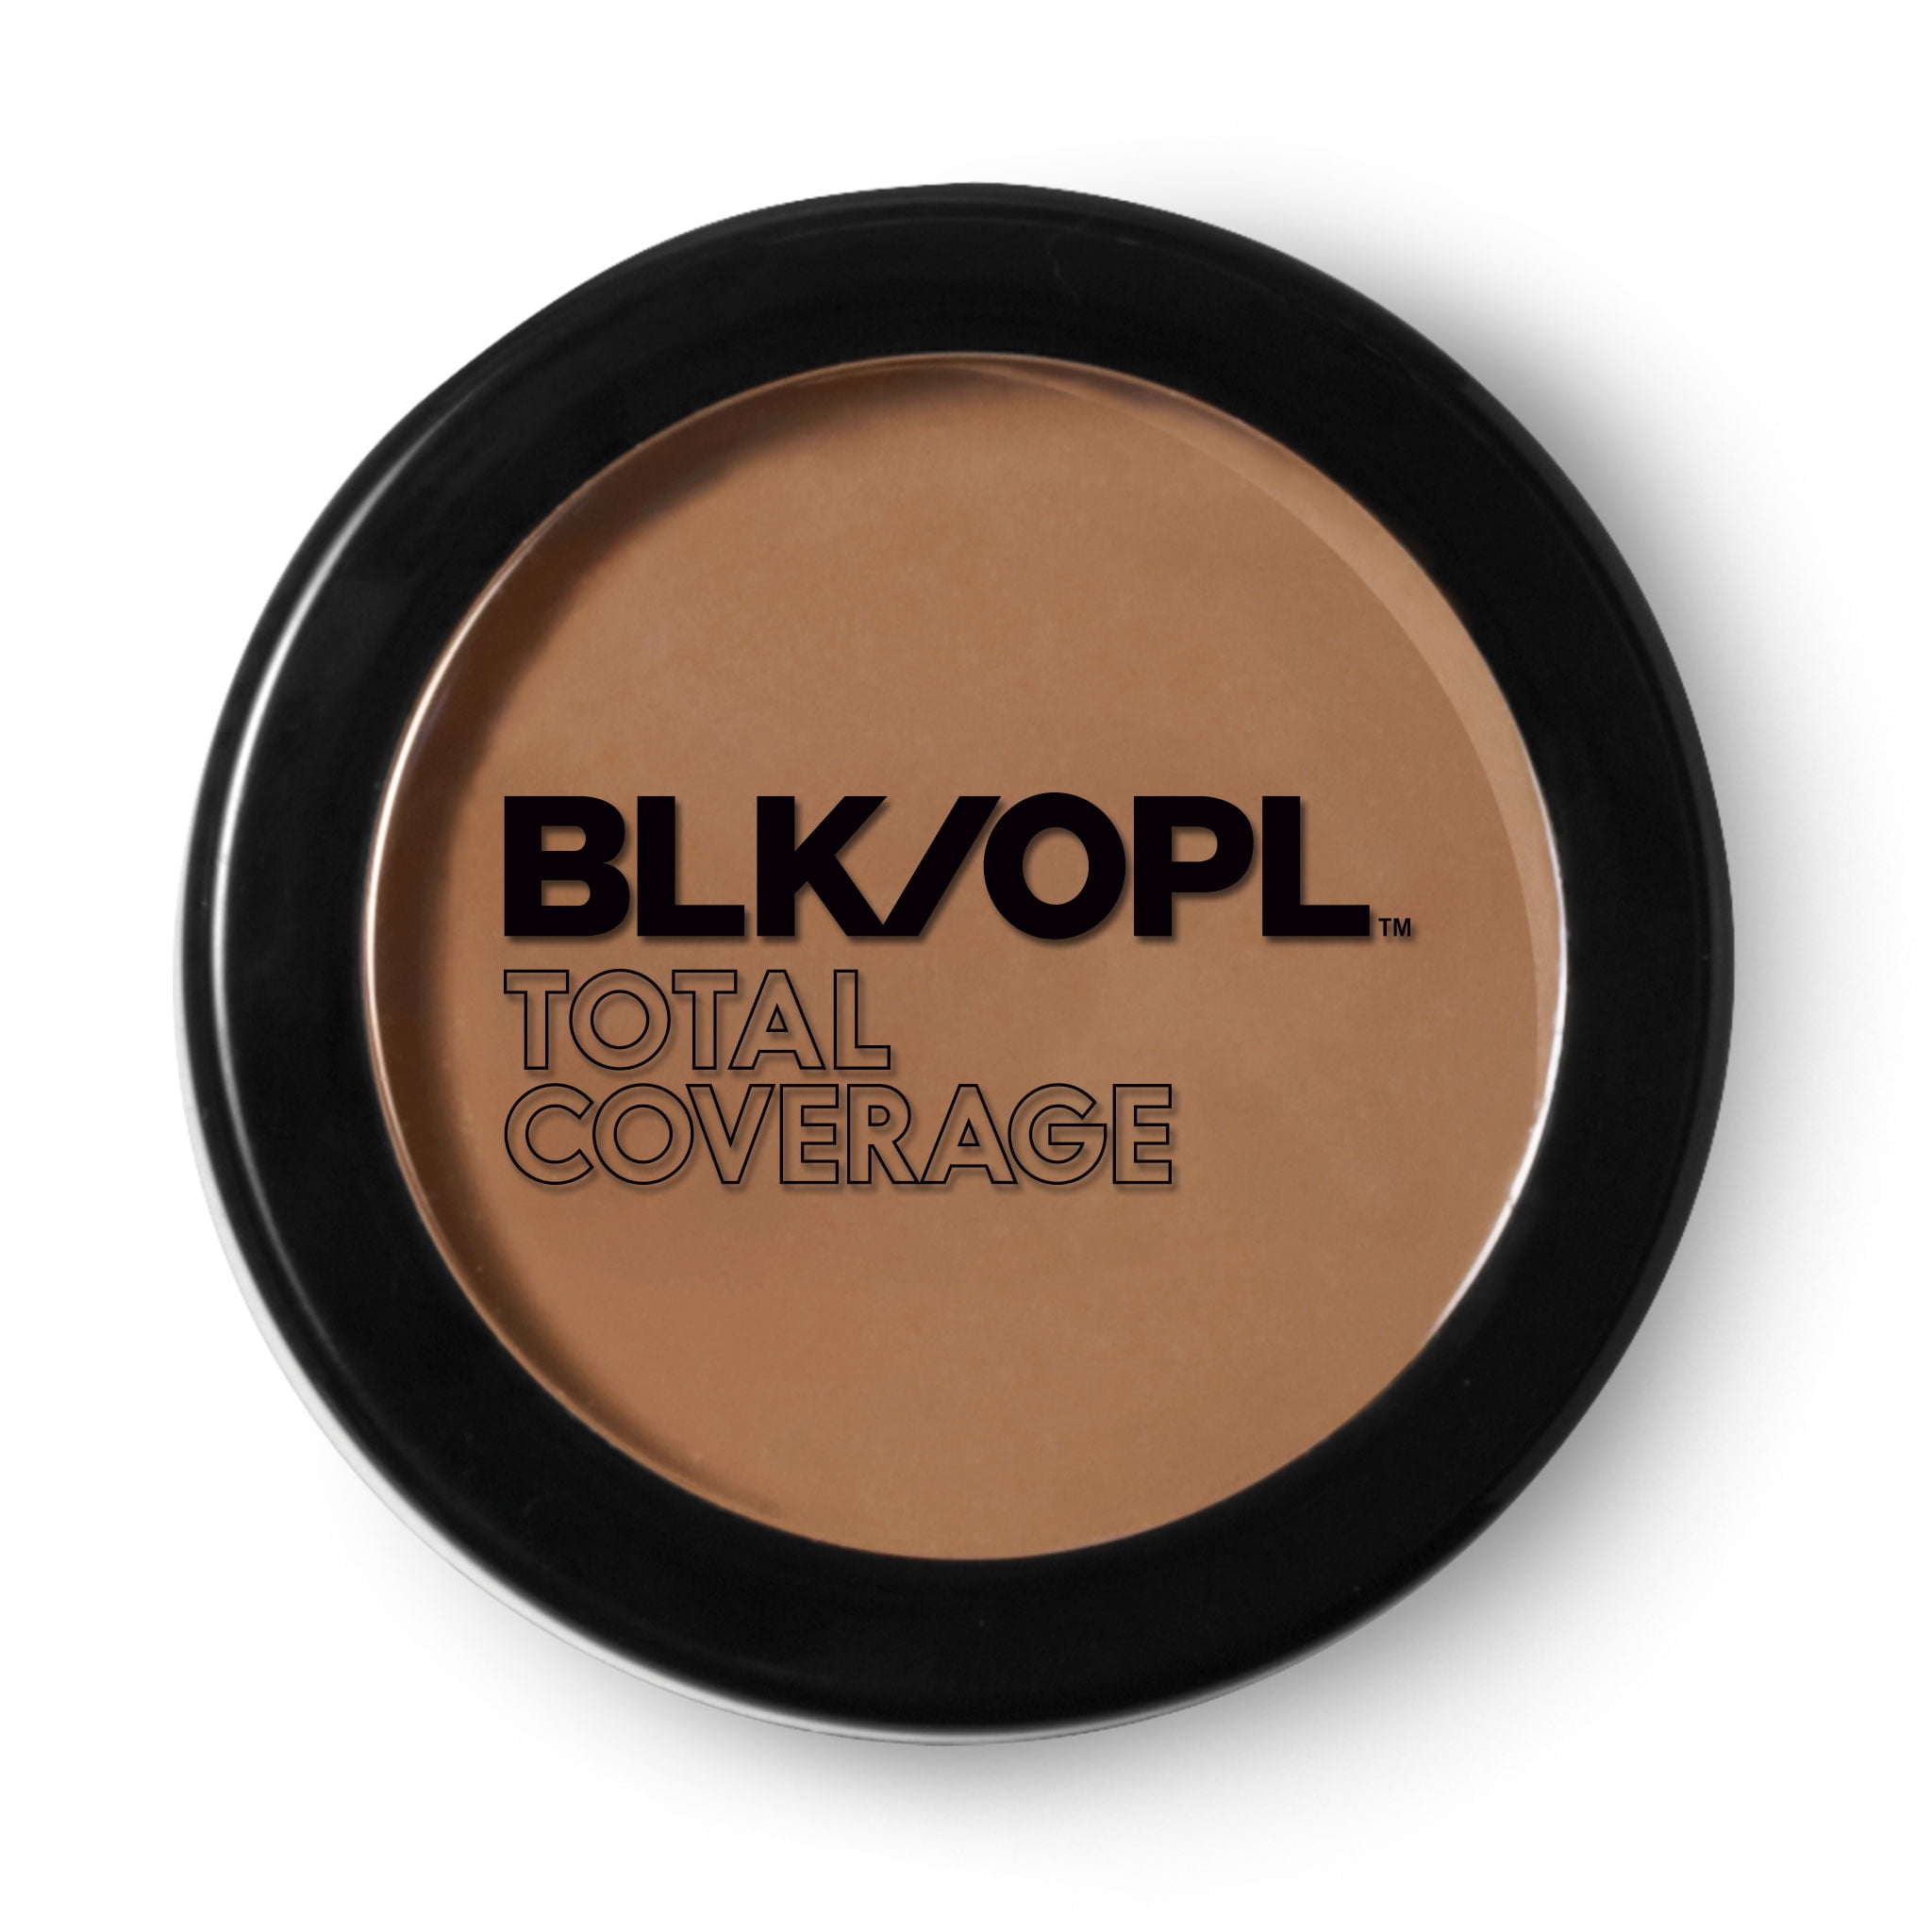 Black Opal Total Coverage Concealing Foundation, Face and Body, Heavenly Honey